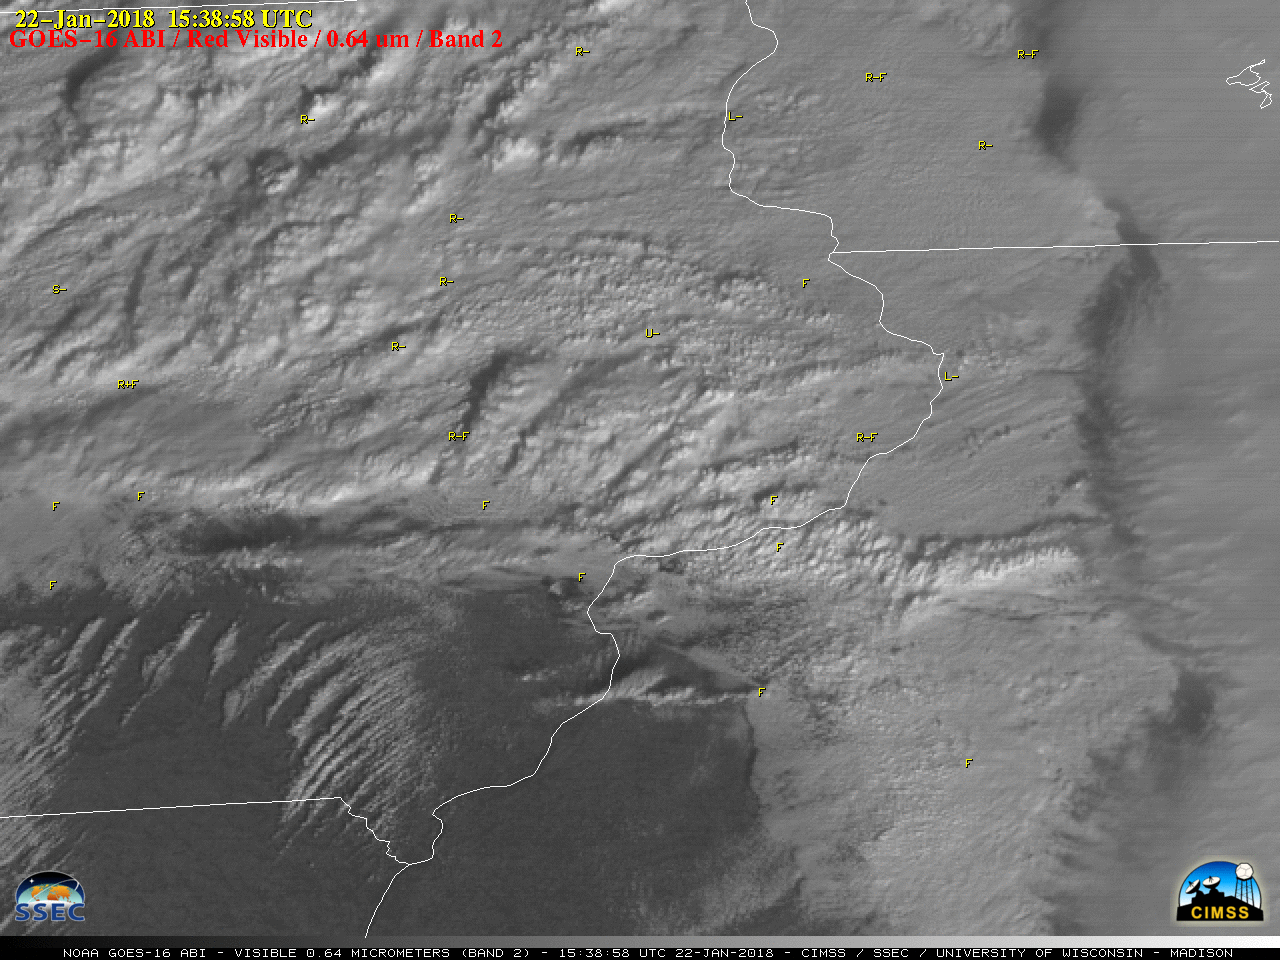 30-second GOES-16 Visible (0.64 µm) images, with hourly precipitation type plotted in yellow [click to play MP4 animation]